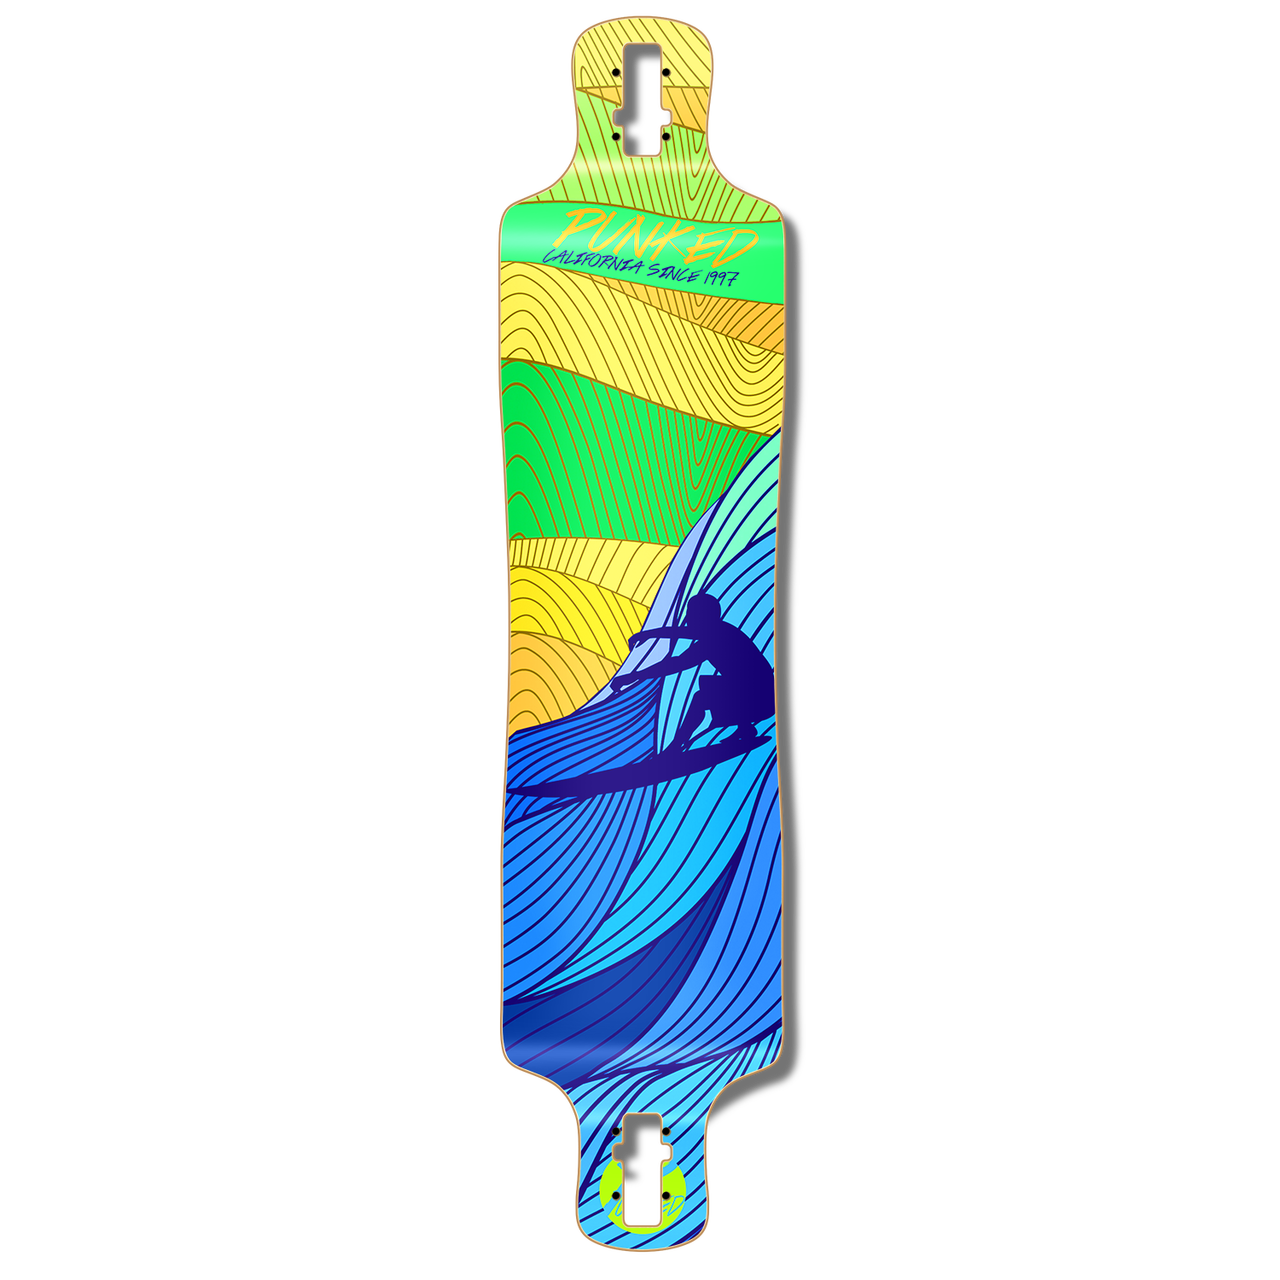 Yocaher Lowrider Longboard Deck - Surf's up